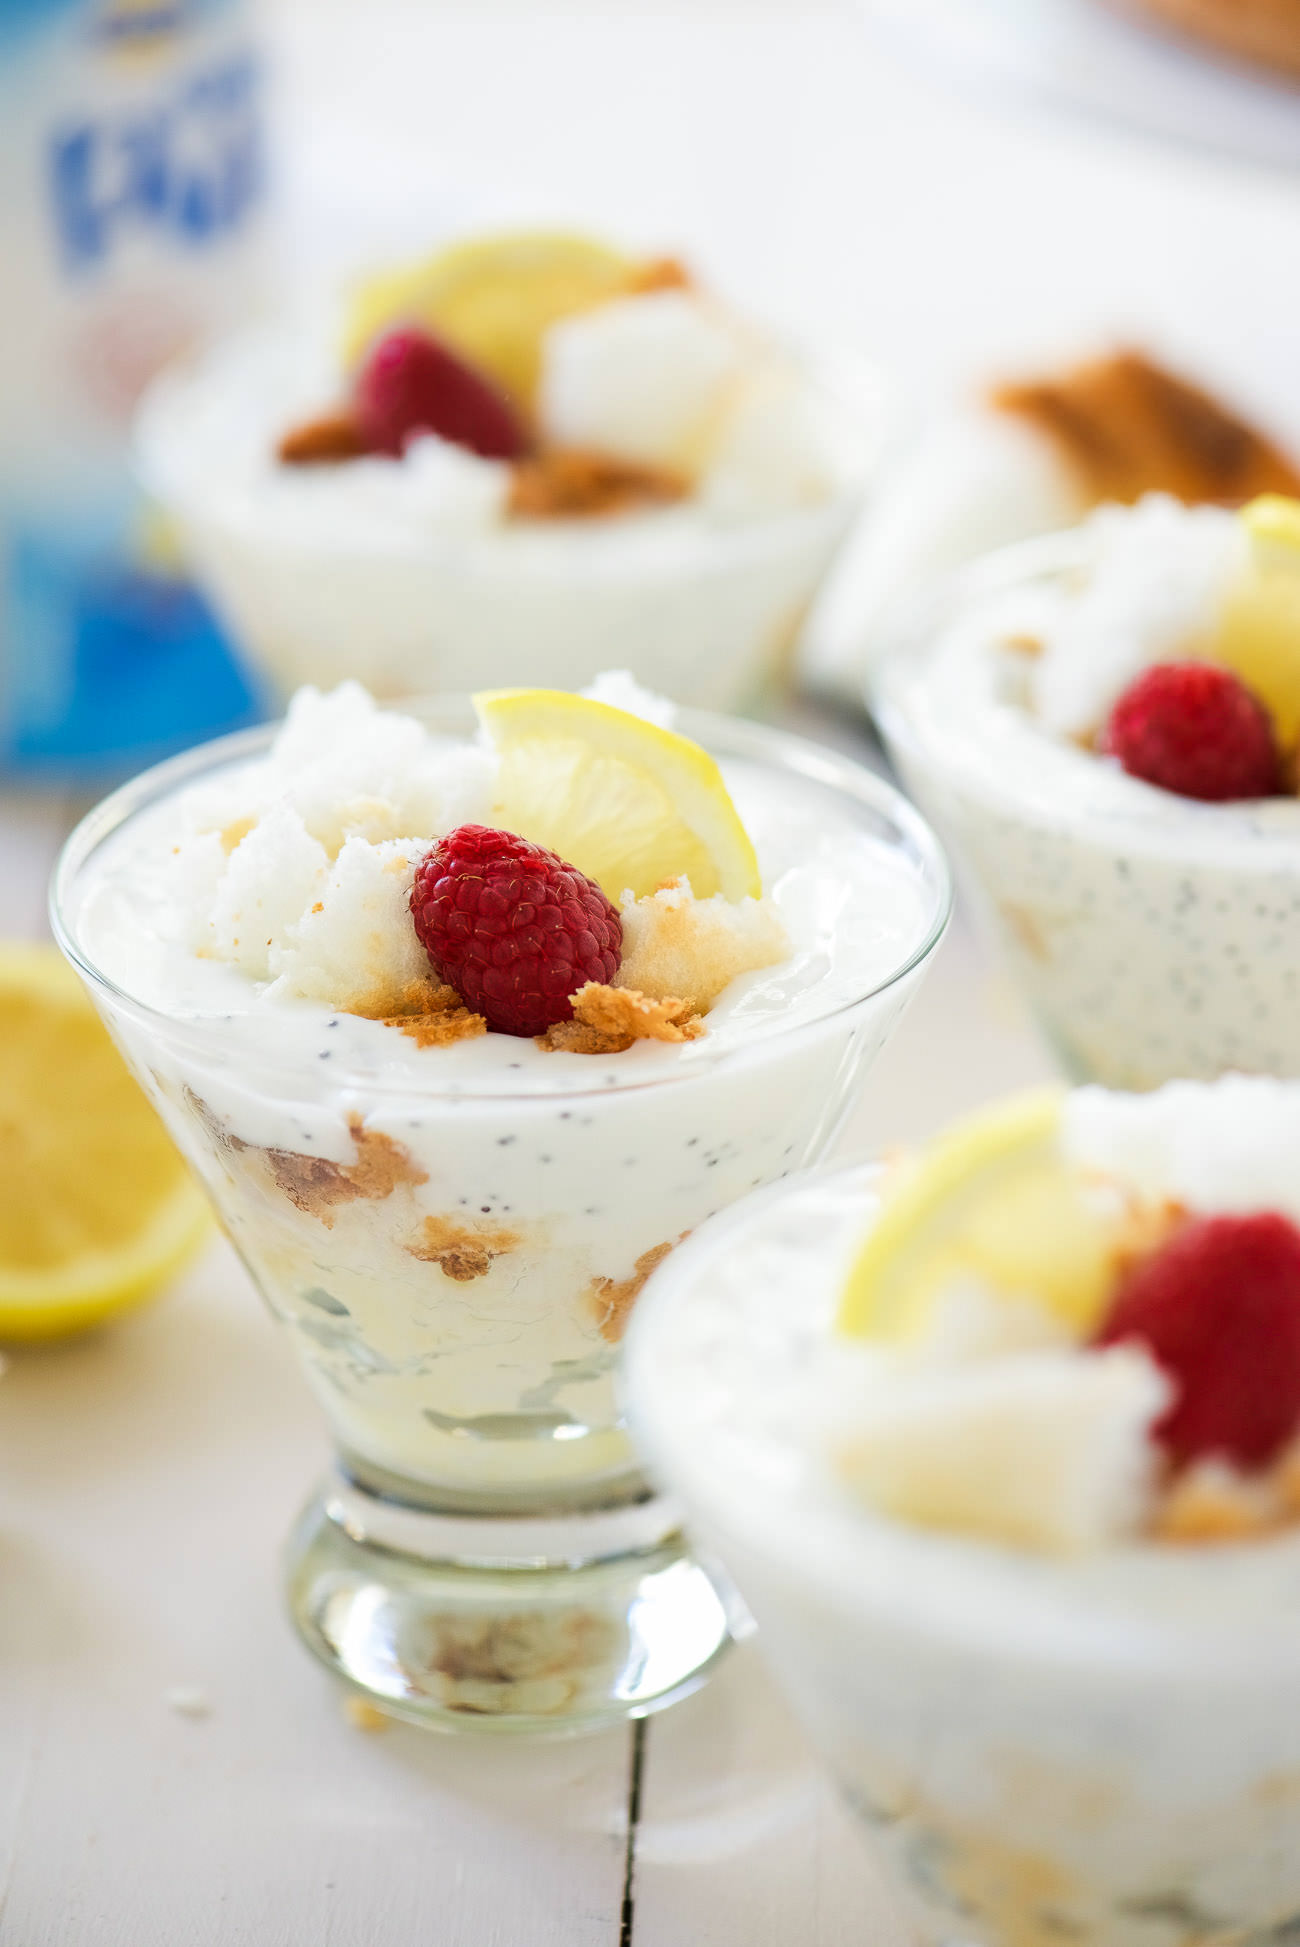 Lemon Poppy Seed Angel Food Trifles are the perfect light dessert! A quick treat with a lemon poppy seed yogurt and sweet, angel food cake crumbles!